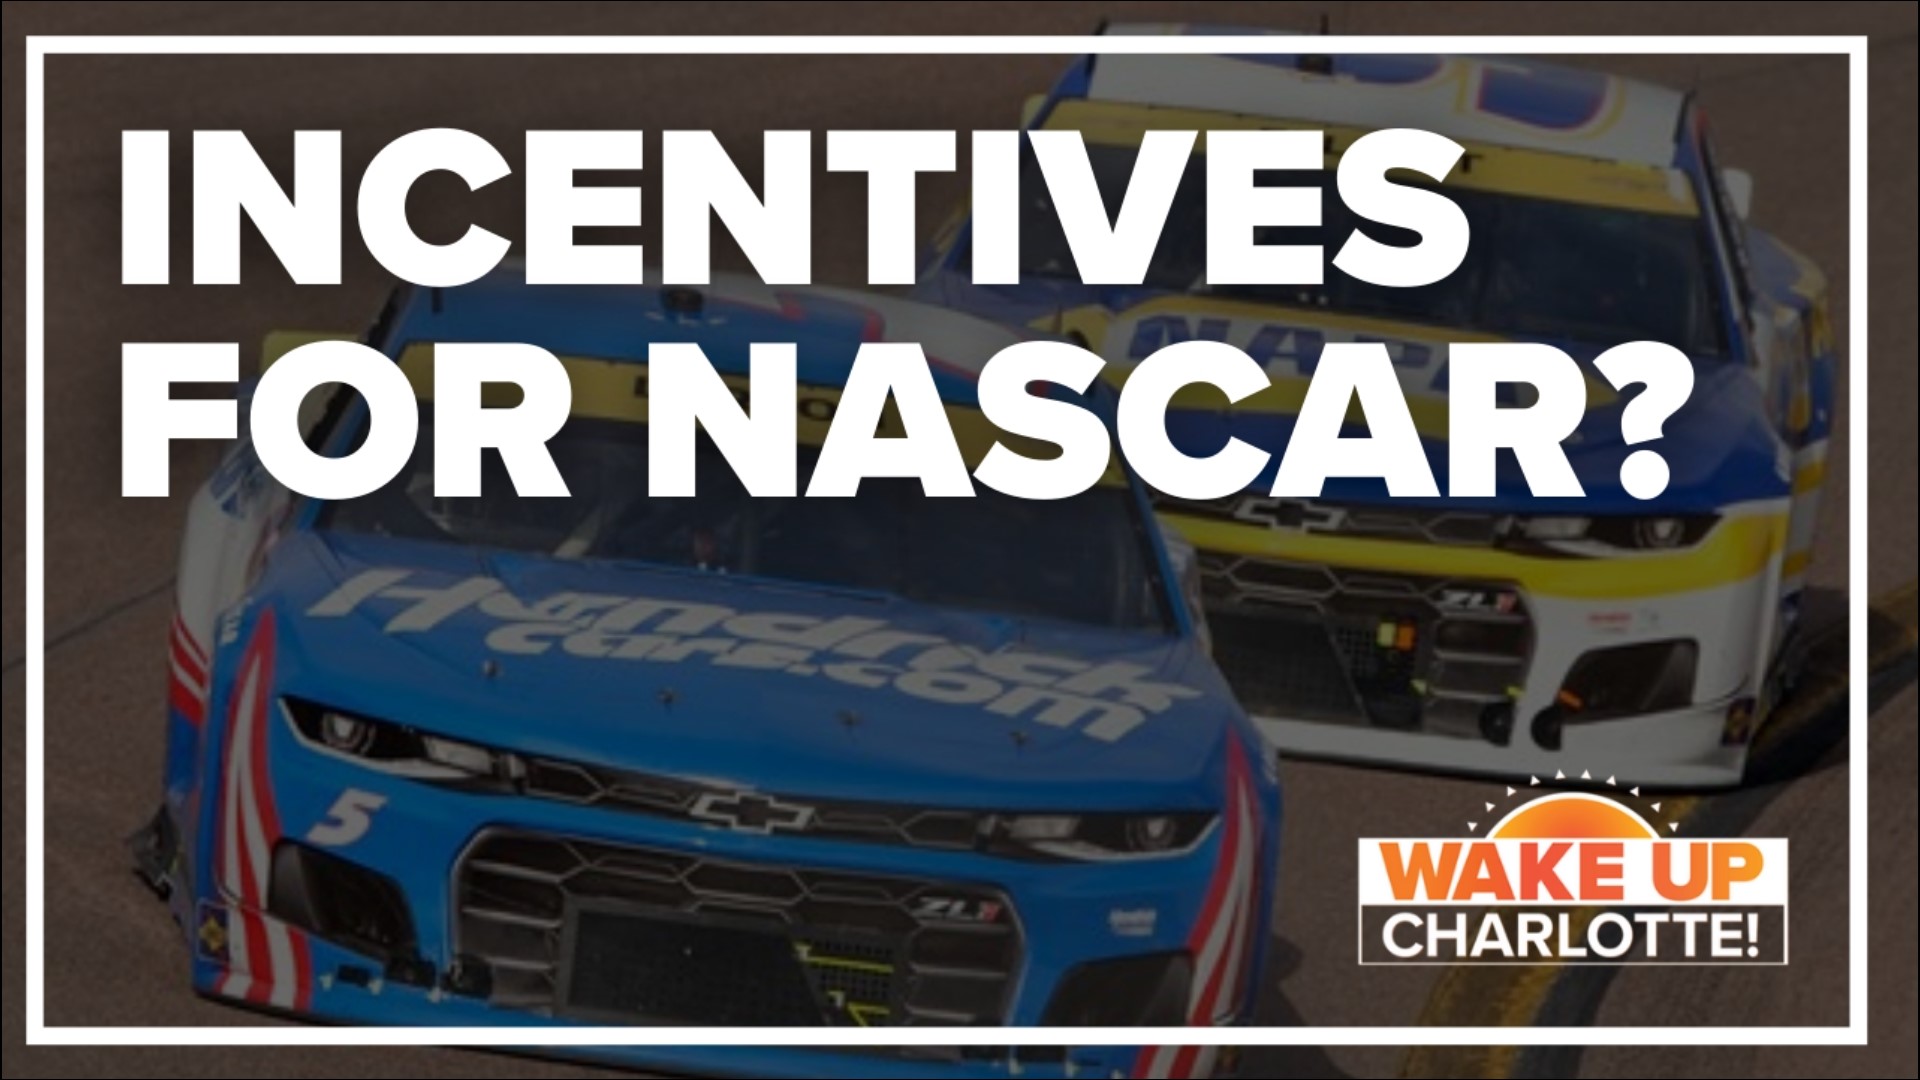 Concord city leaders are considering incentives that would move NASCAR's productions operations from Uptown Charlotte to Concord.